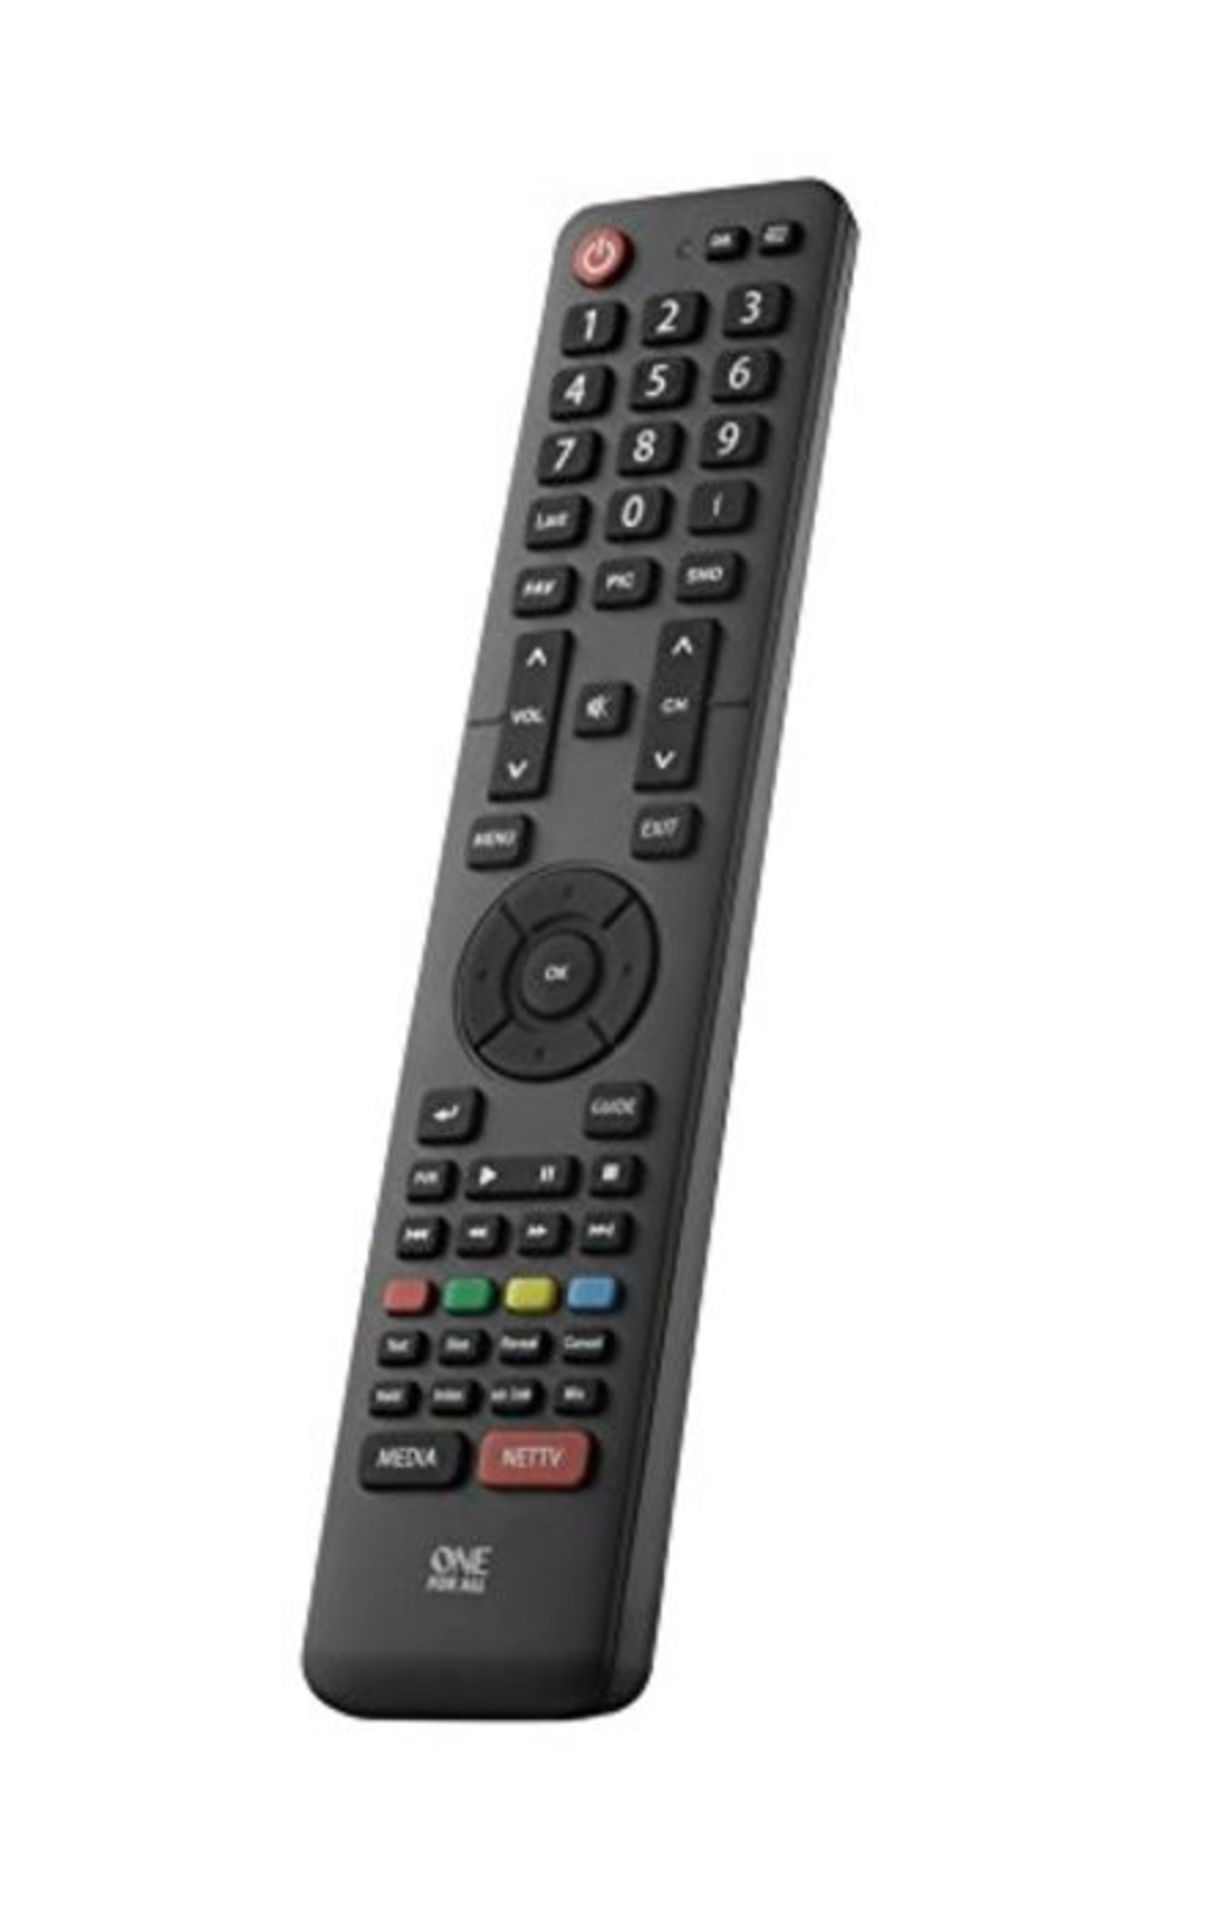 One For All Hisense TV Replacement remote URC1916 - Works with ALL Hisense televisions